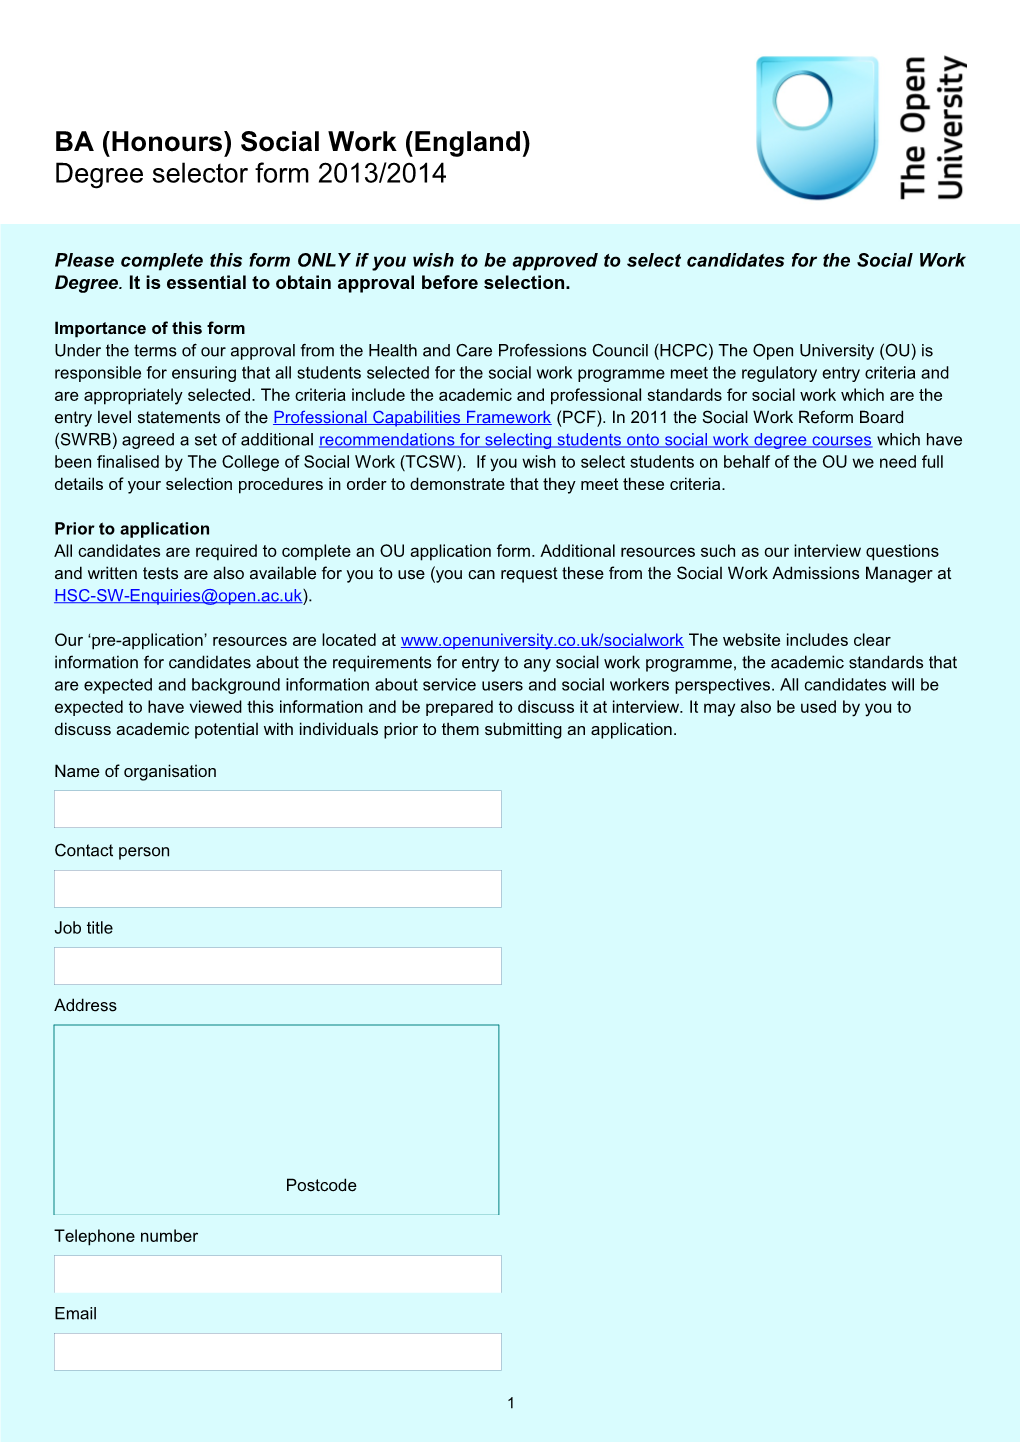 Please Complete This Form ONLY If You Wish to Be Approved to Select Candidates for The